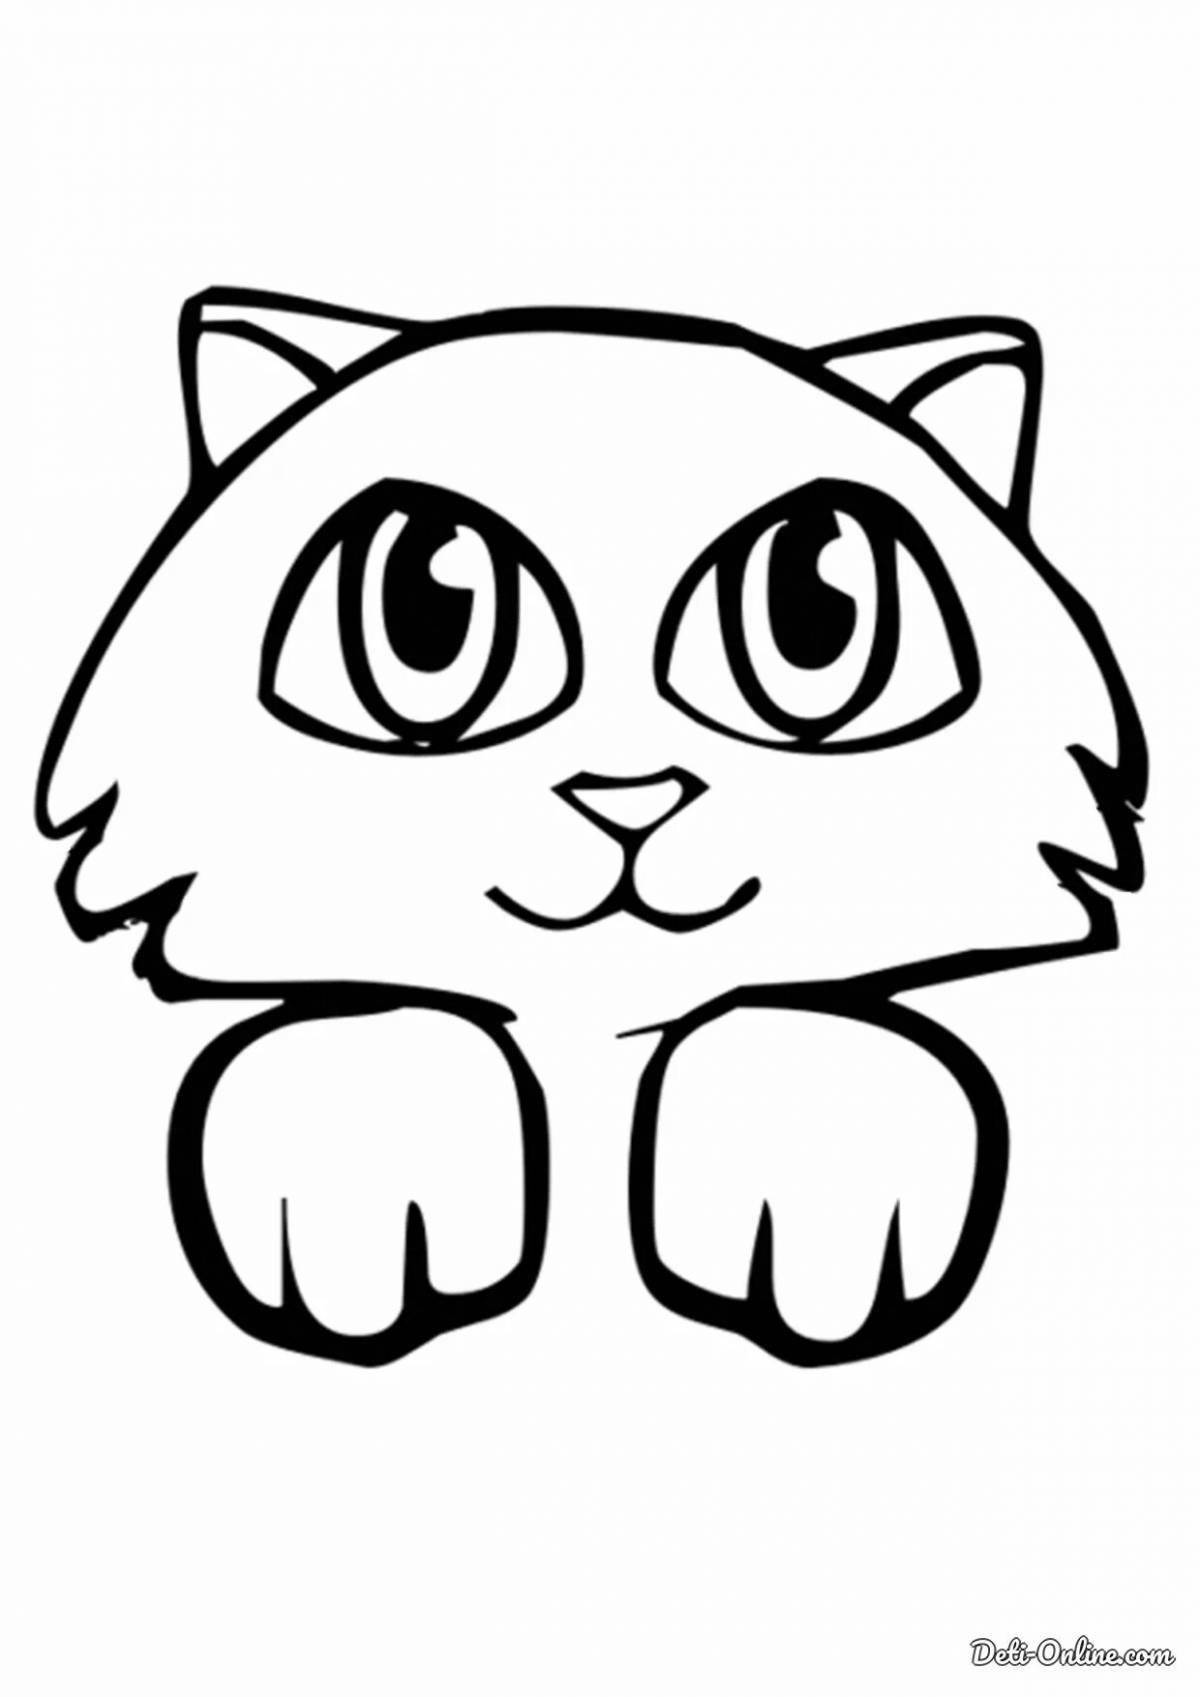 Cute and playful kitten coloring book